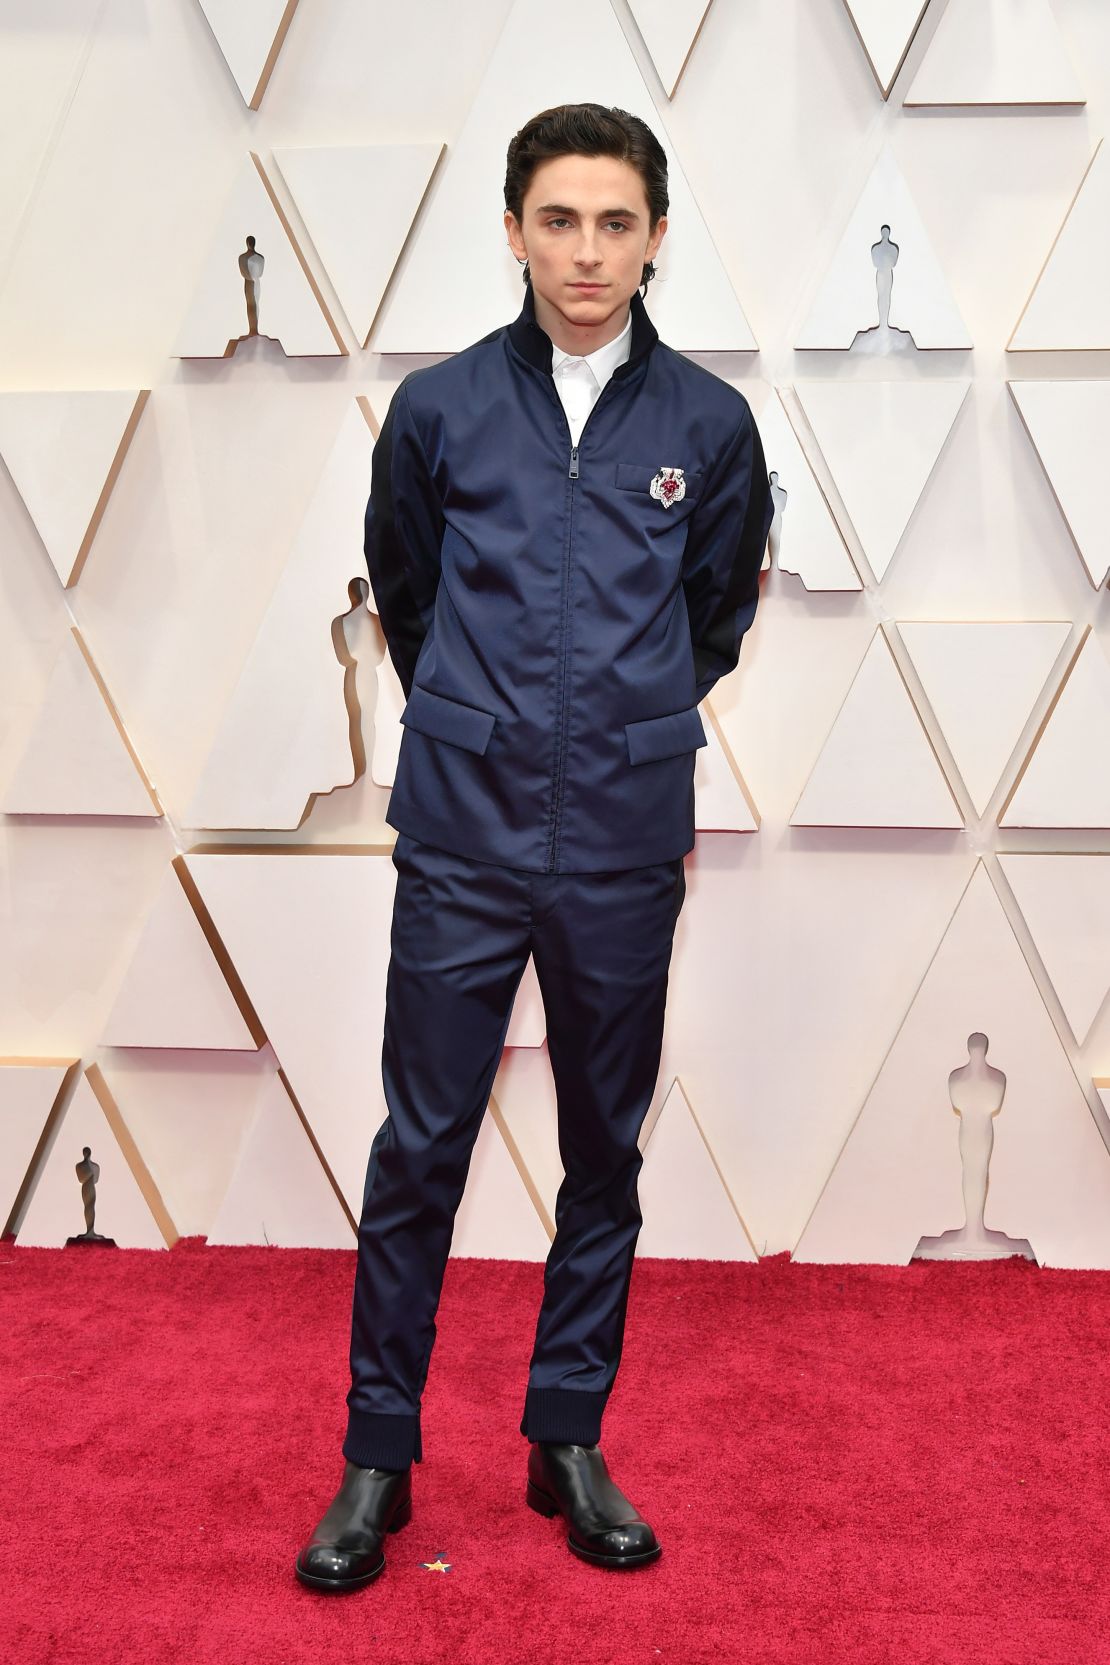 Timothée Chalamet's Prada outfit at the 2020 Oscars was made using yarn made from regenerated nylon, created from materials such as ocean plastics, fishing nets and textile fiber waste. A vintage Cartier brooch finished the look.